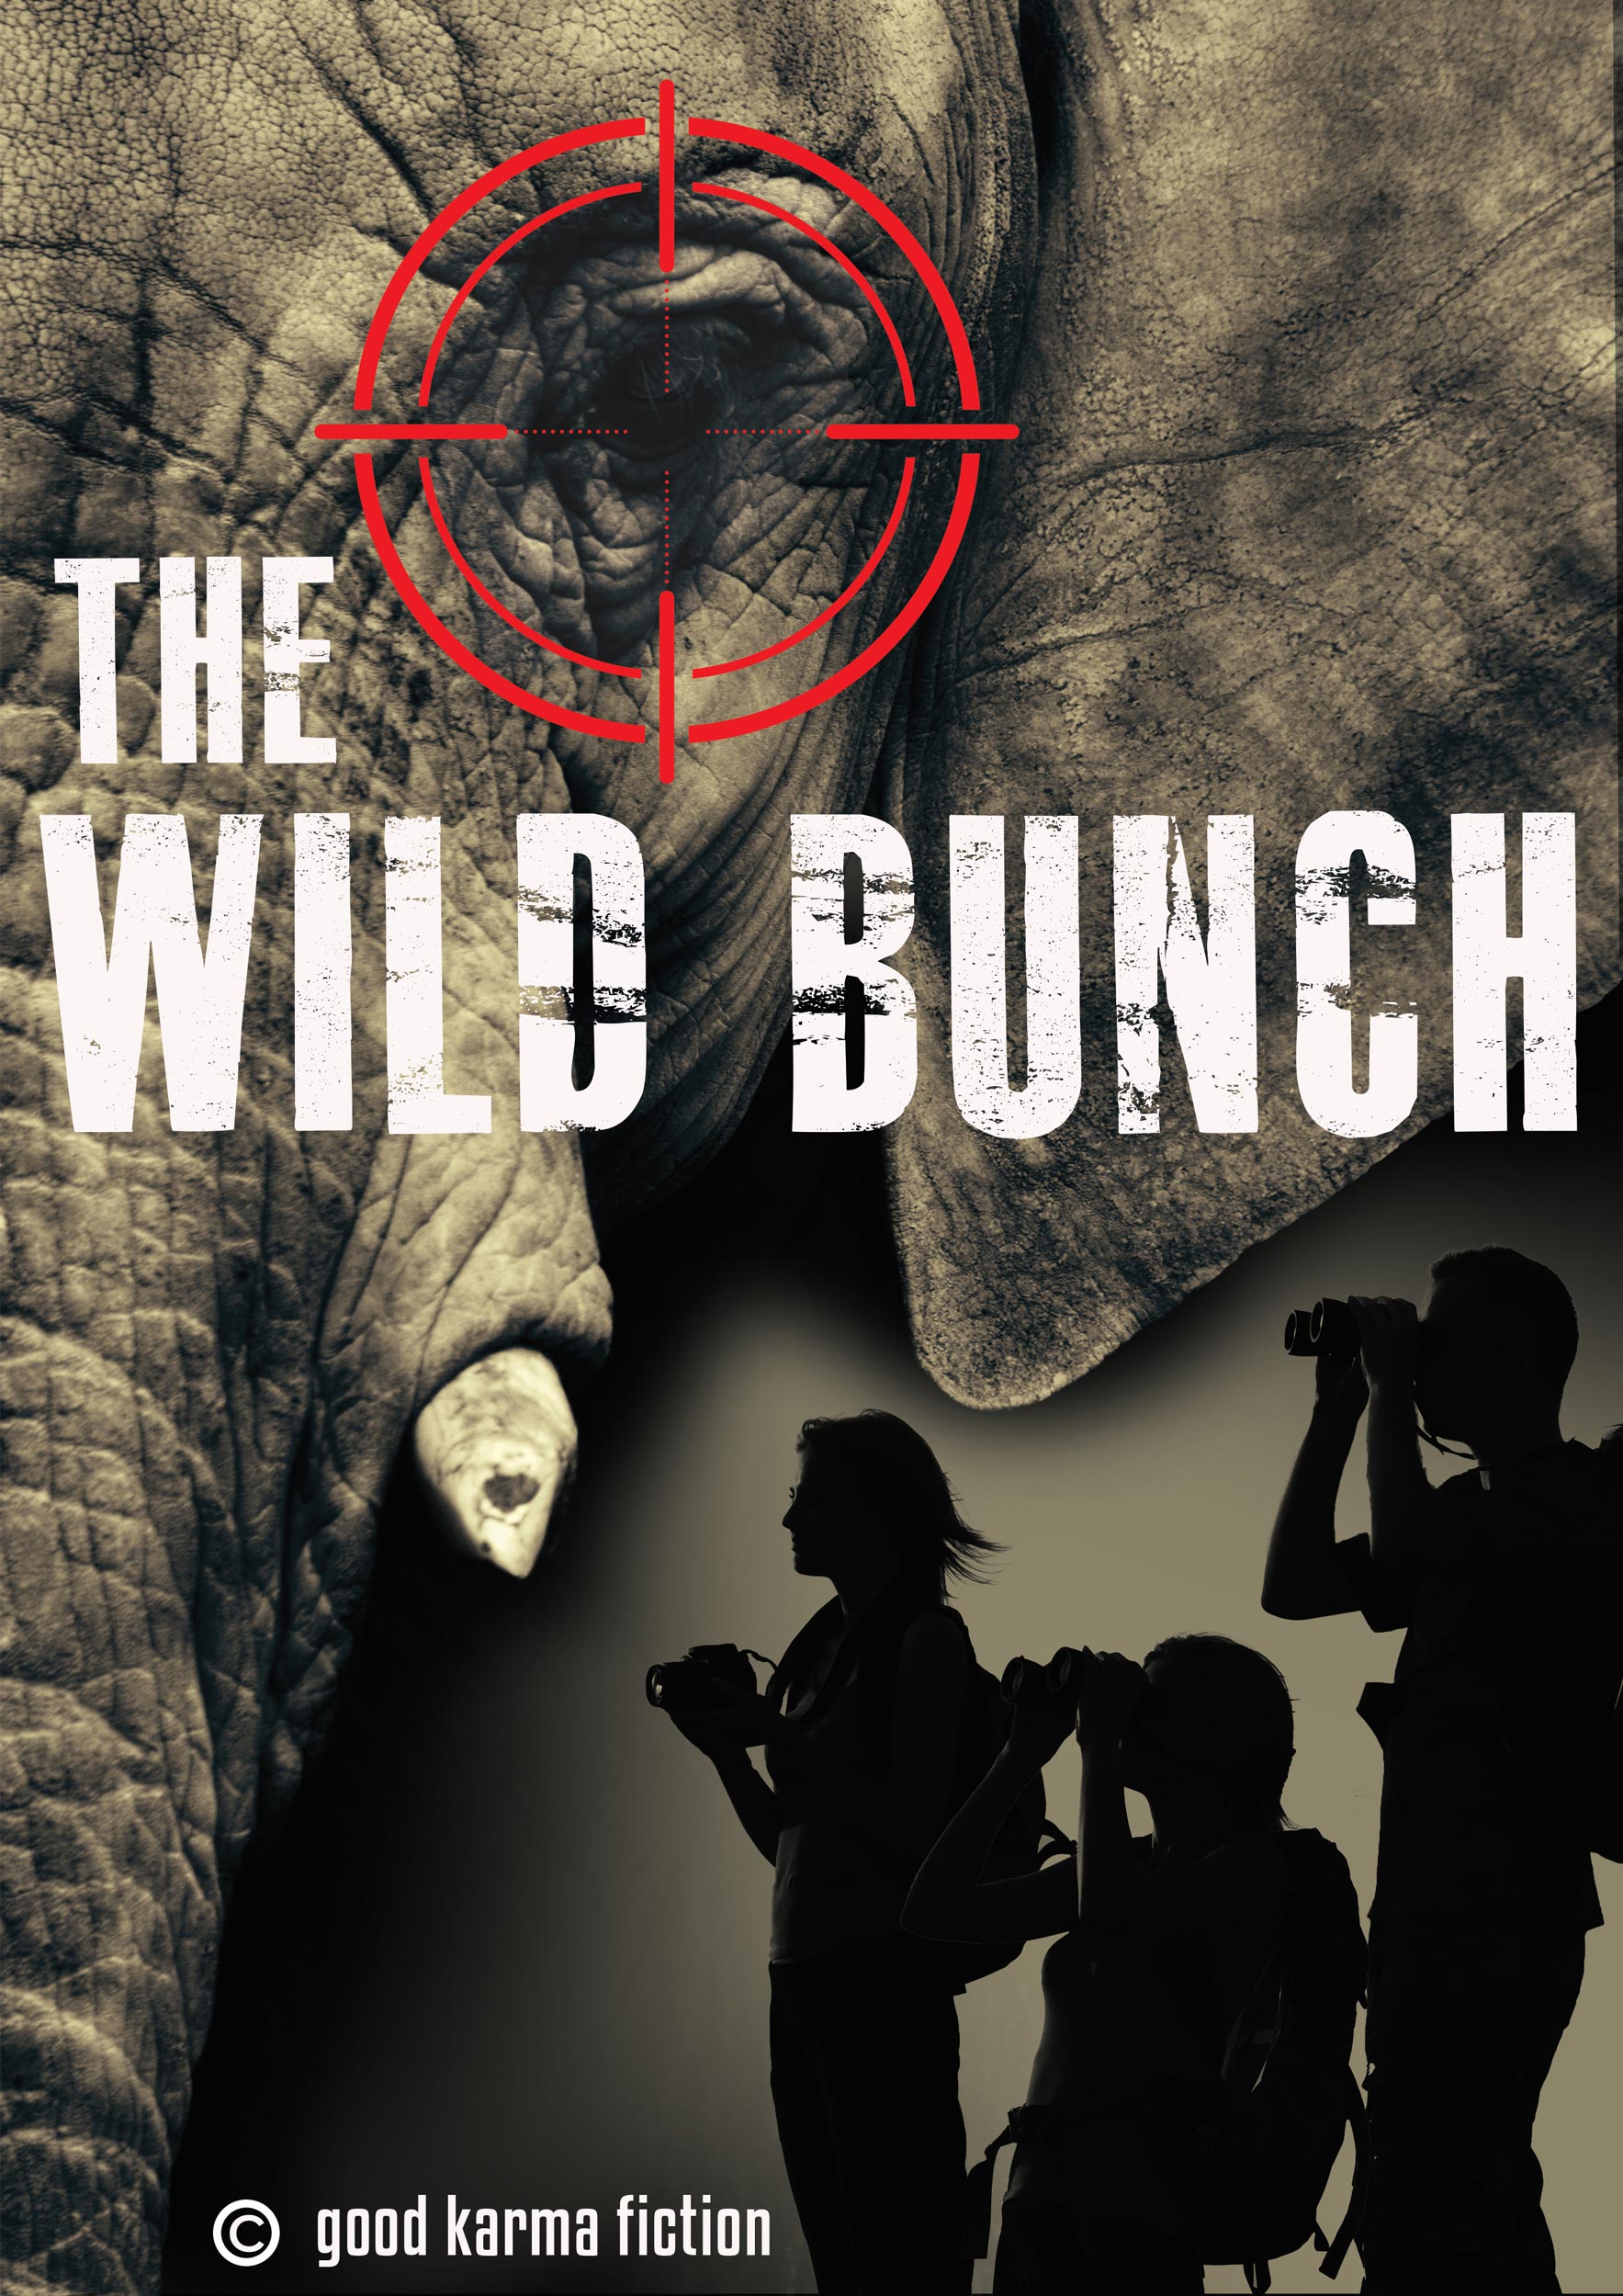 <i  id="iconinf1" class="fas fa-info" aria-hidden="true"></i><br> <h3>THE WILD BUNCH</h3><br><p>  An easygoing Safari holiday turns into a dangerous adventure, when 15 year old Jana and Lem, 16, try to save an abandoned baby elephant who’s mother was shot by local ivory poachers … <br><br><b>-Teenage adventure, Miniseries<BR> In Development</b></p>